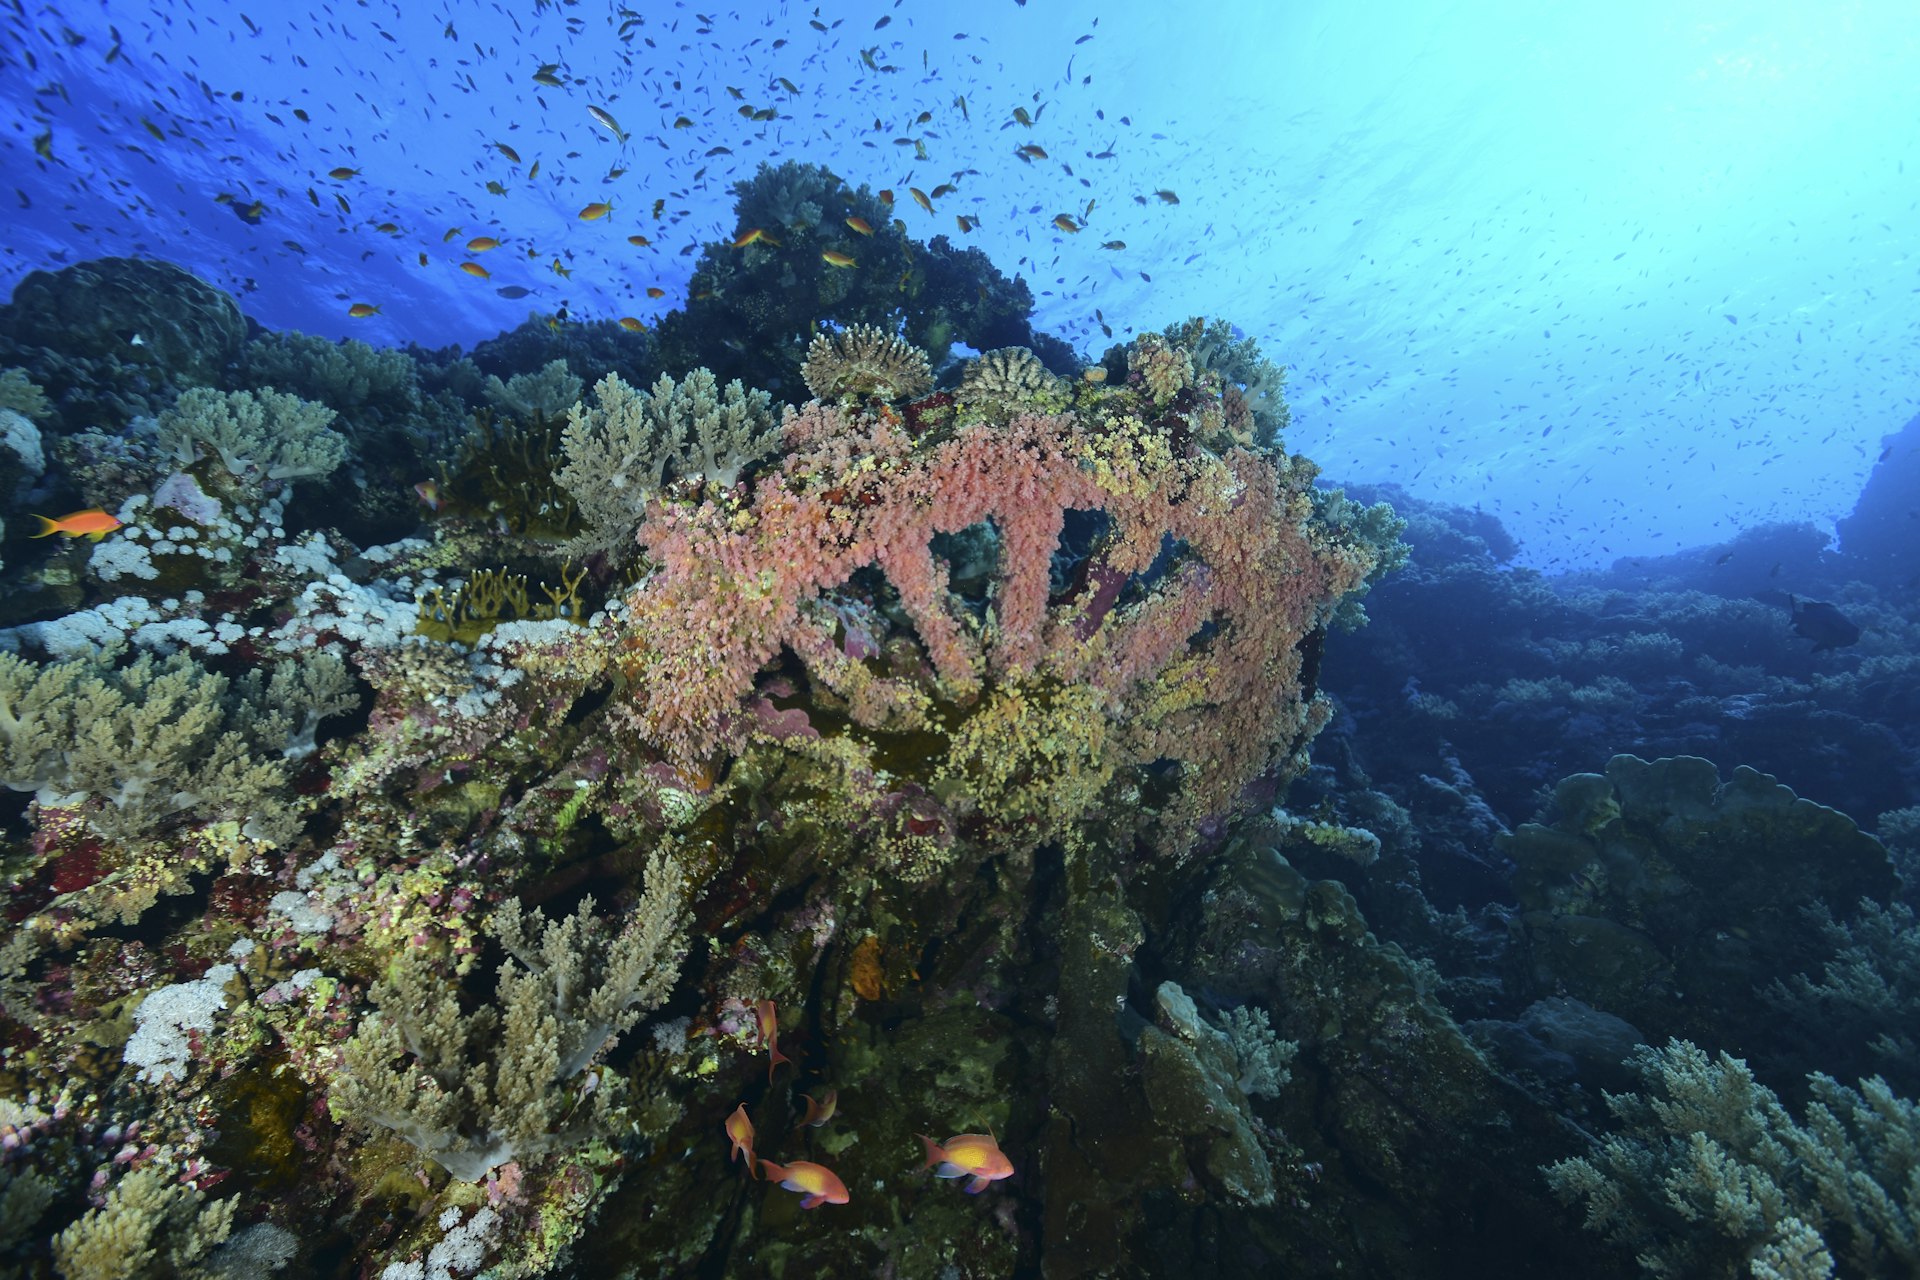 Closeup of the Numidia cargo ship wreck covered in coral and surrounded by underwater wildlife in the Red Sea, Egypt.